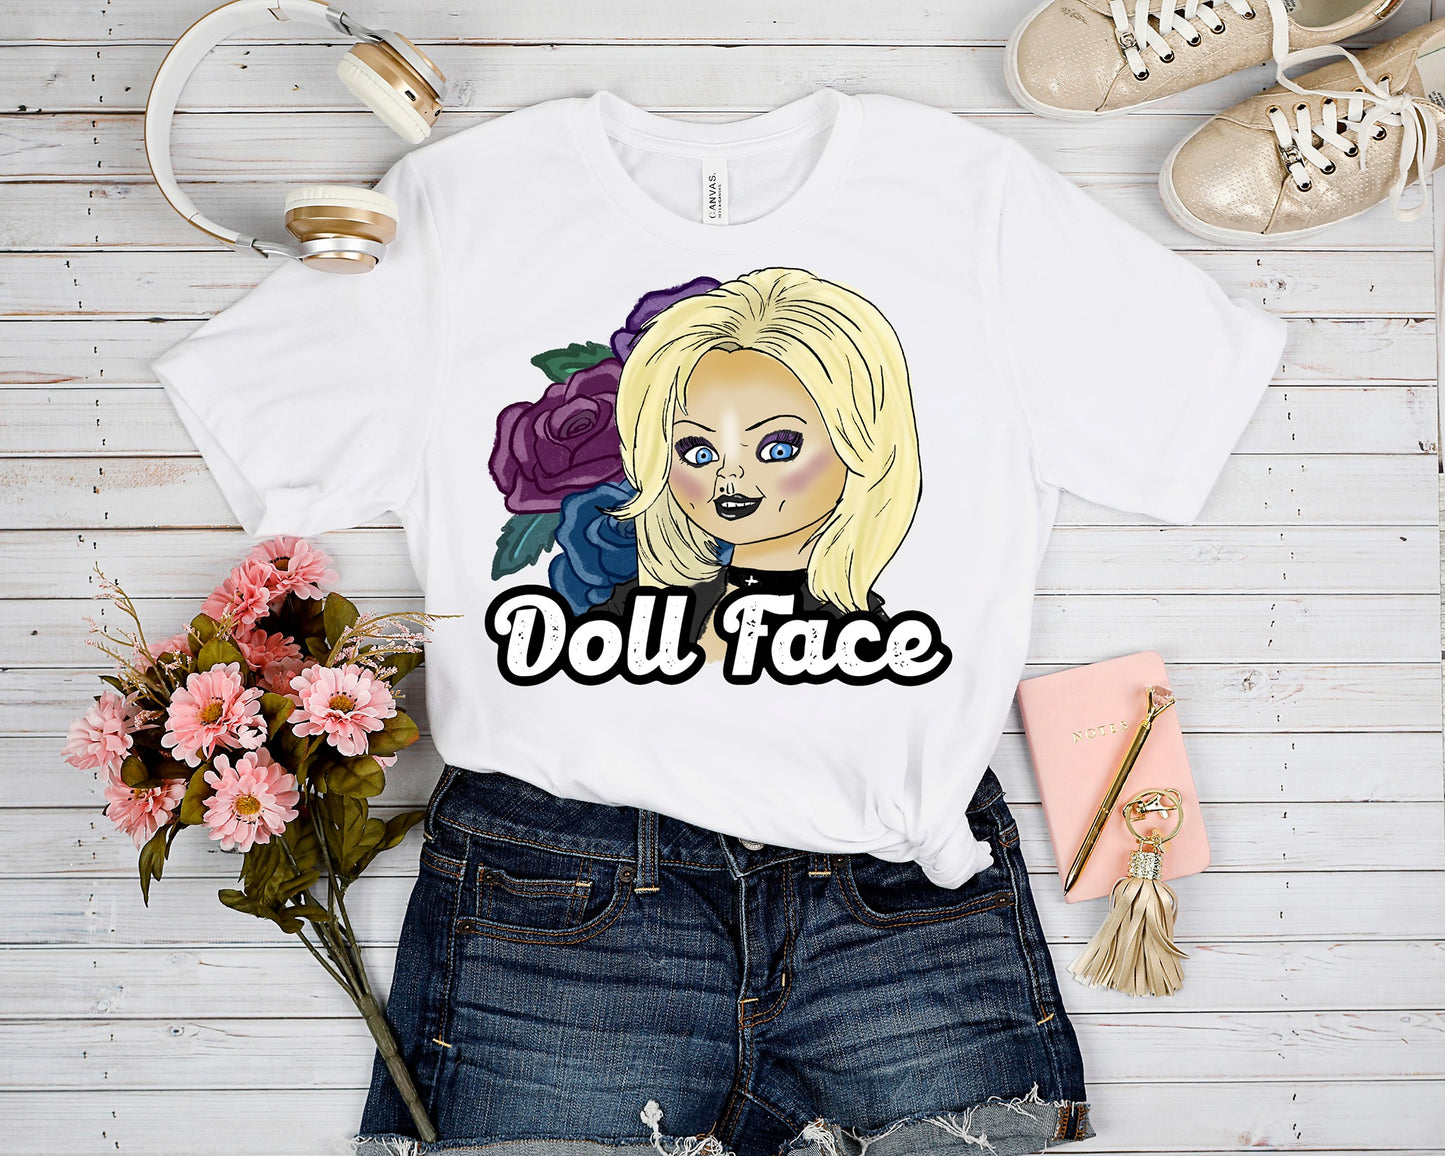 OUTFIT 6- DOLL FACE TEE